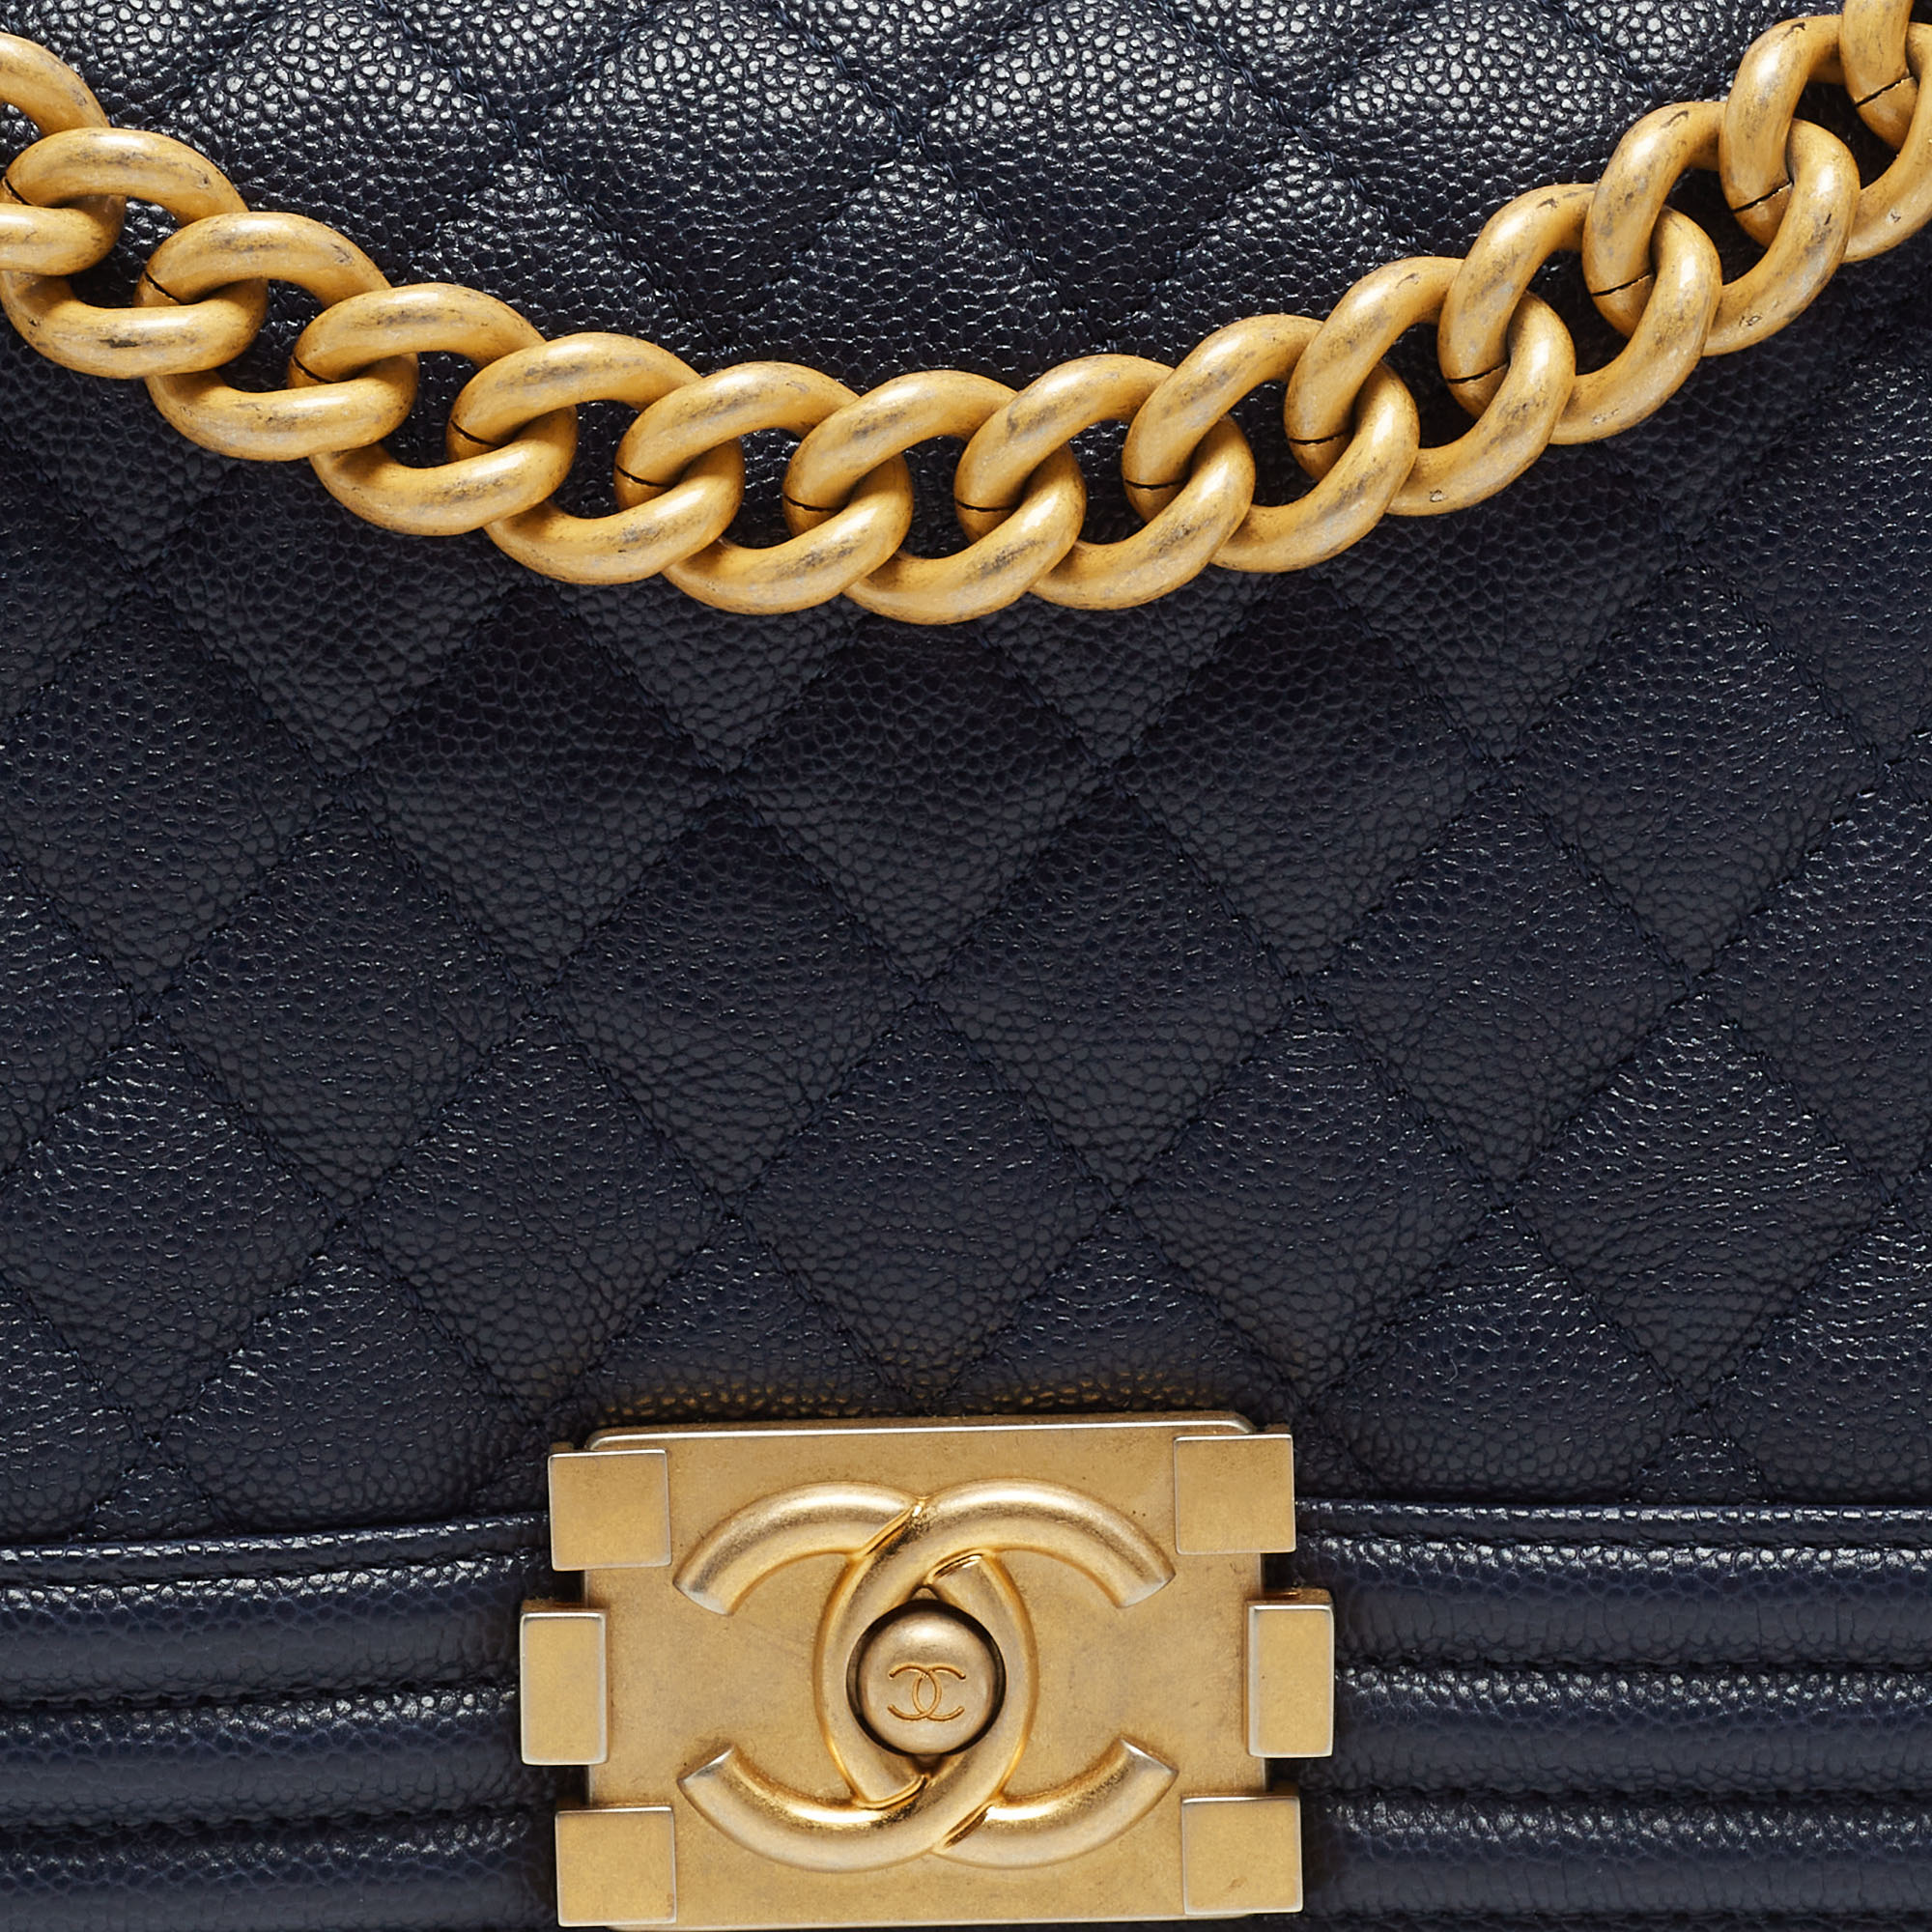 Chanel Navy Blue Quilted Caviar Leather Medium Boy Flap Bag